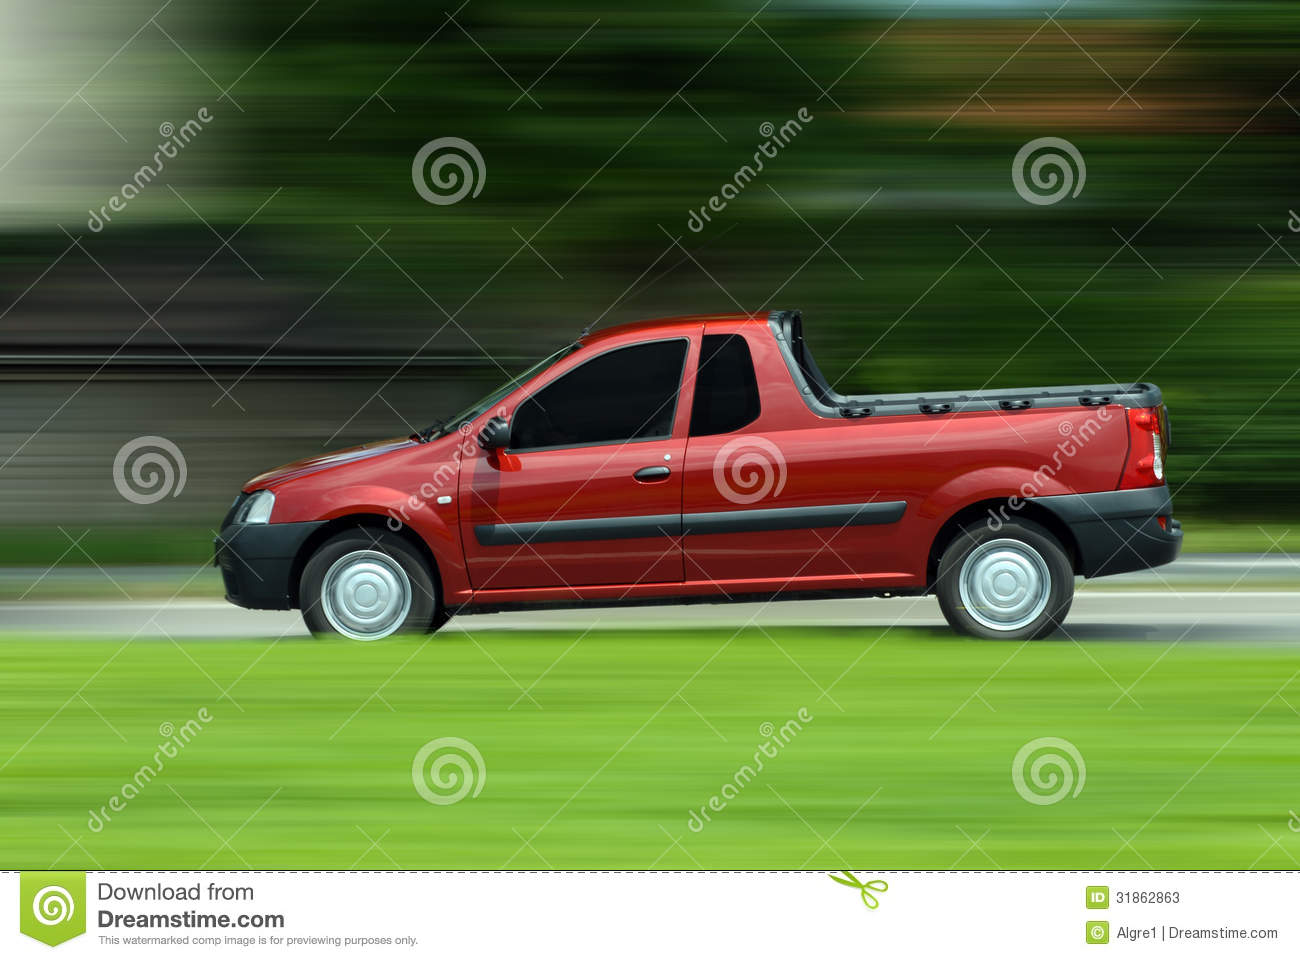 Moving Pick Up Stock Photos   Image  31862863